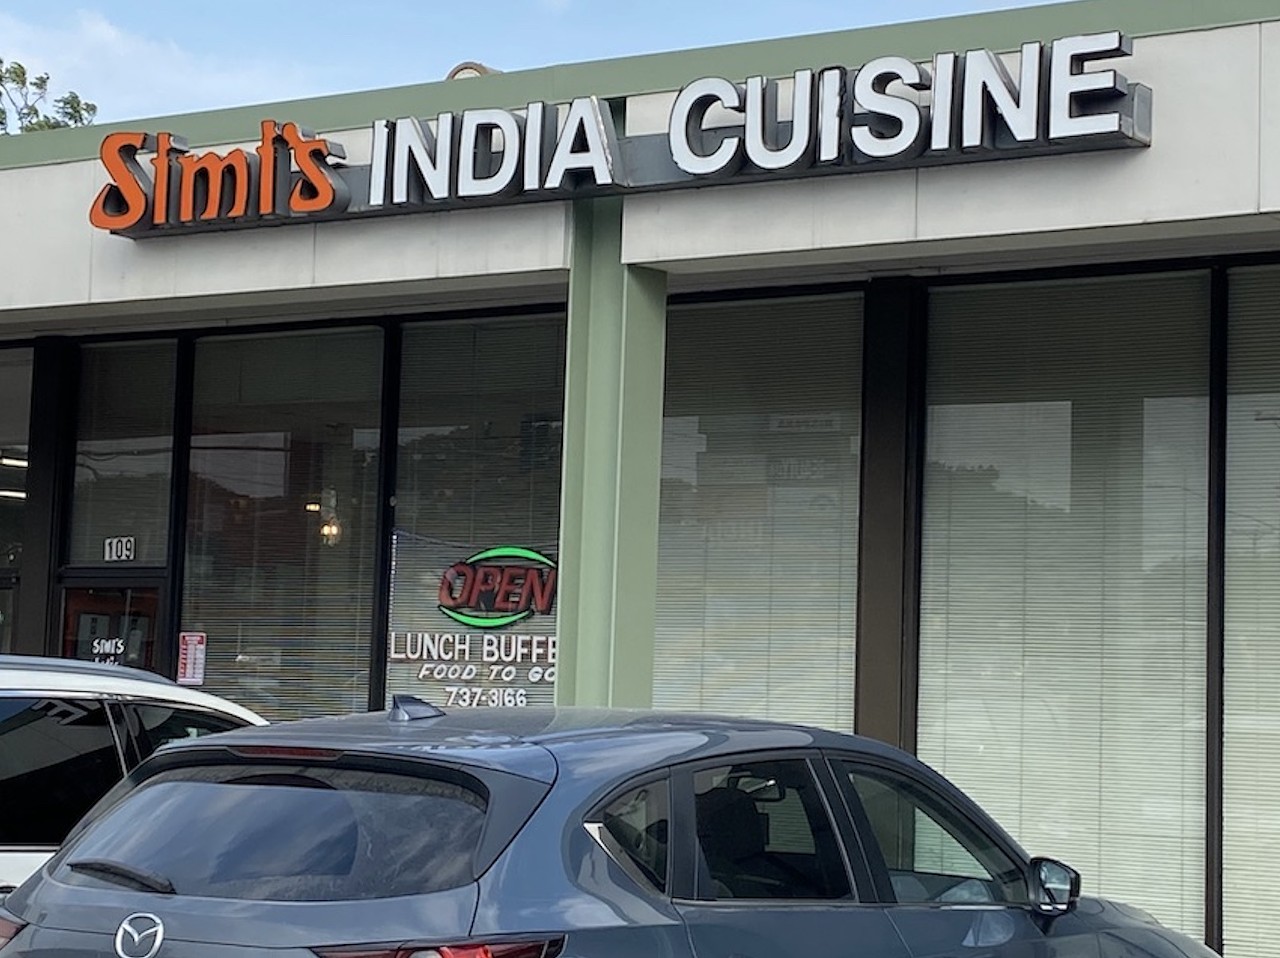 Simi's India Cuisine
4535 Fredericksburg Road #109, (210) 737-3166, facebook.com/p/Simis-India-Cuisine-100064028920187
Those with special diets will feel more than welcome here thanks to a number of vegetarian dishes on the menu. The restaurant's delicious tandoori dishes amply prove why this spot is a go-to for Indian fare for many locals.